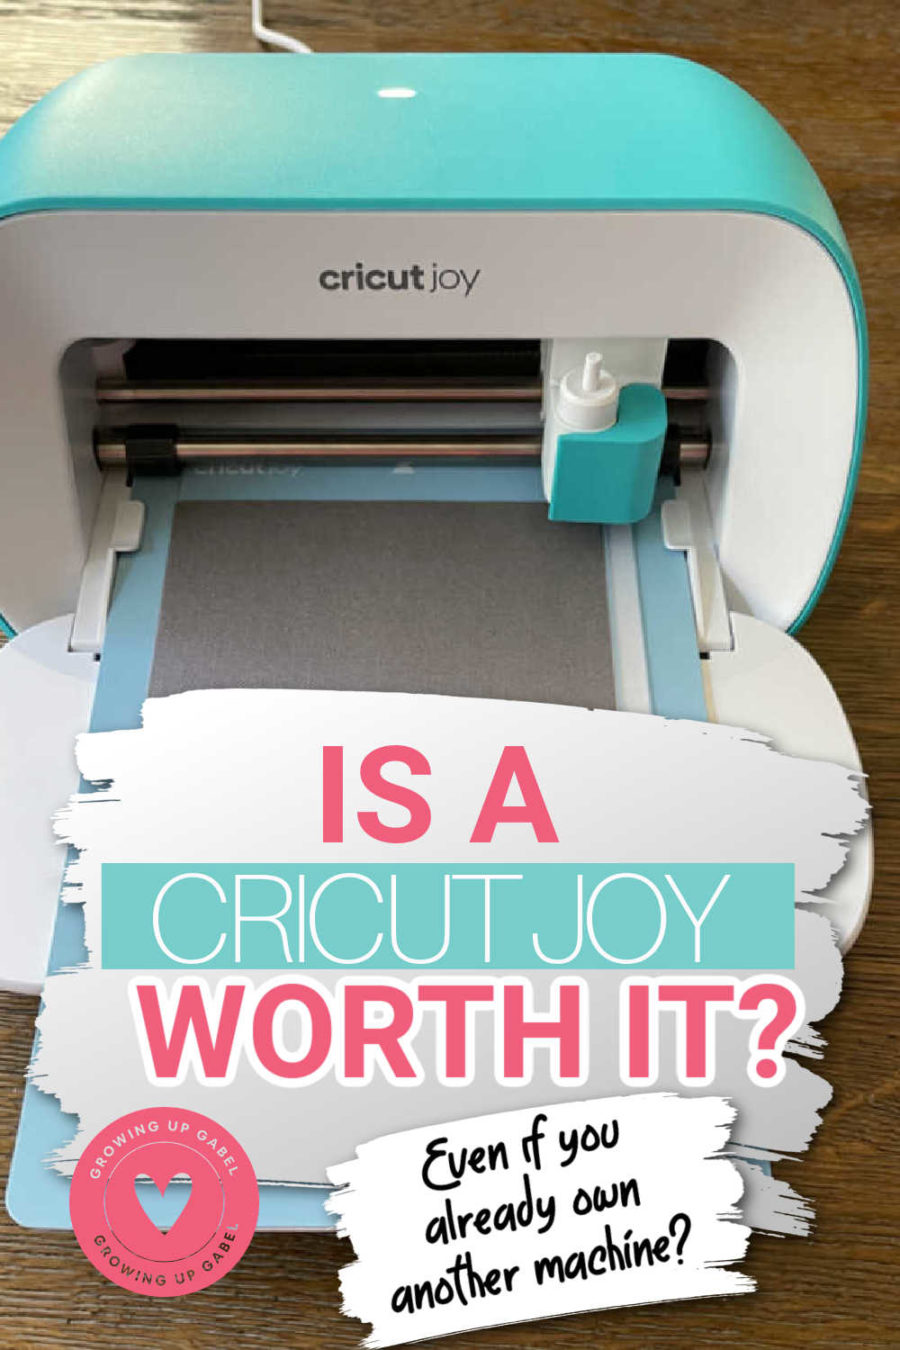 WILL I USE THE CRICUT MACHINE ENOUGH TO JUSTIFY THE PRICE?